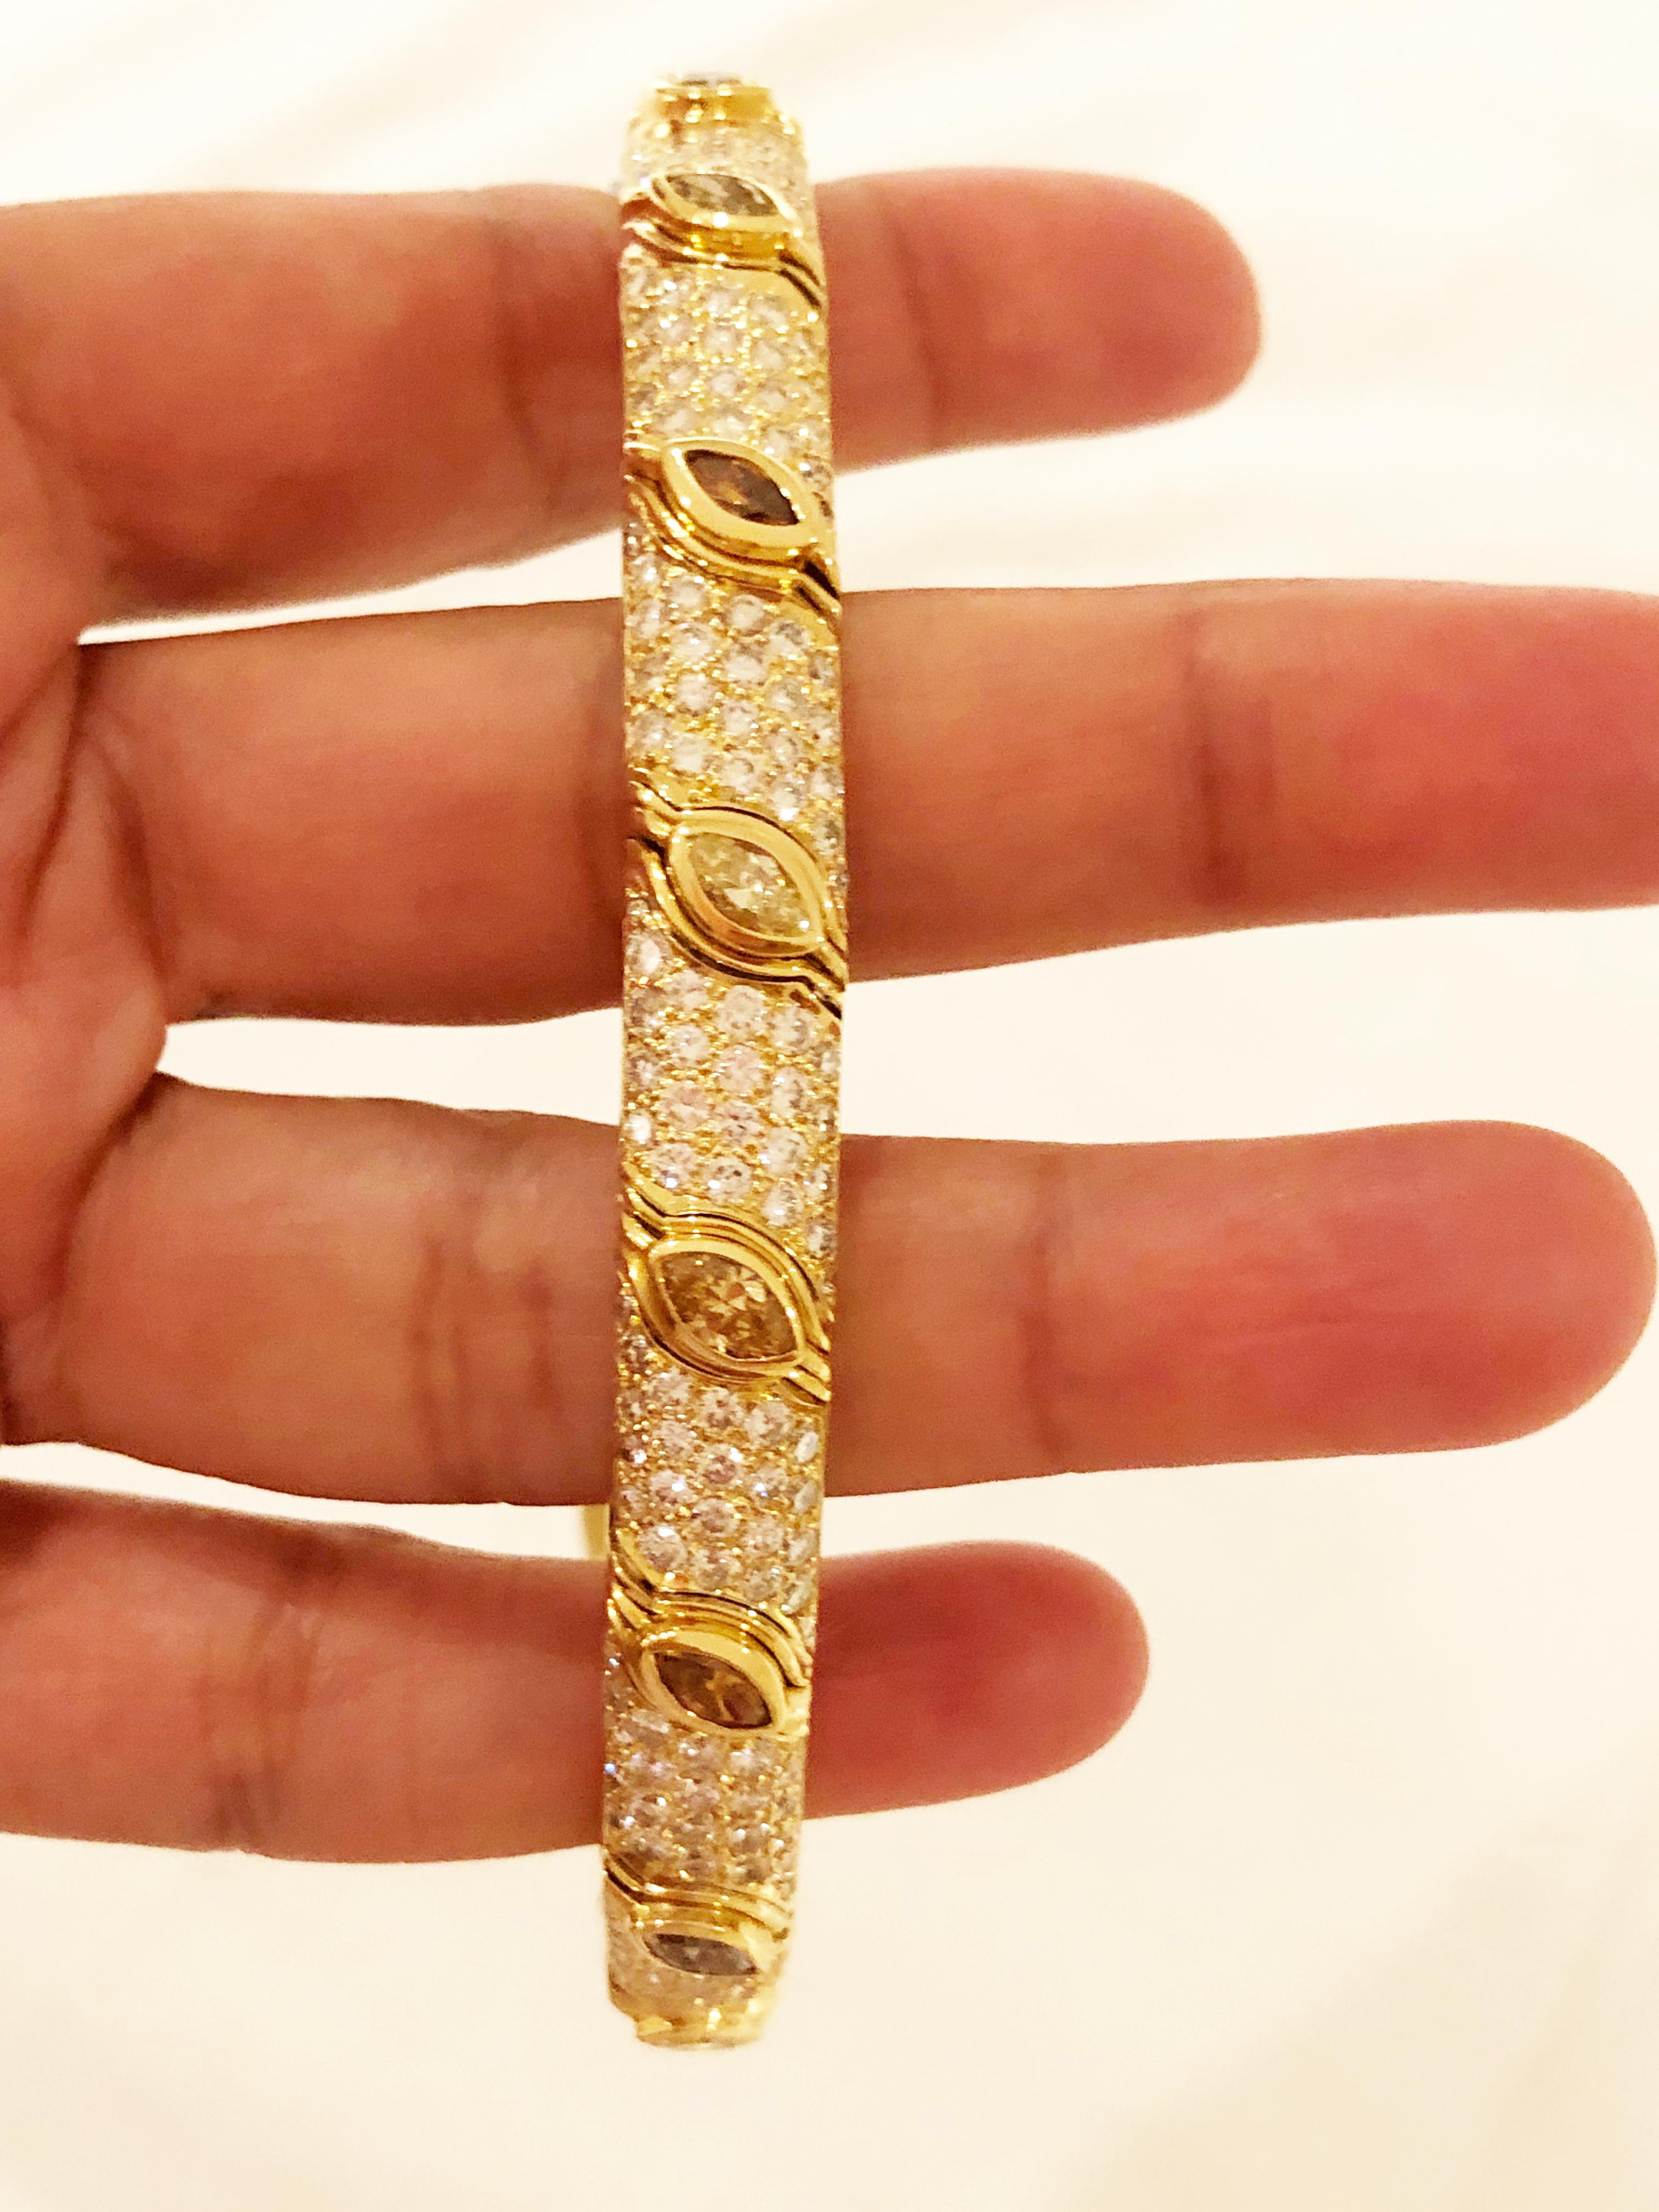 Gorgeous estate Bulgari multi color marquise and round diamond bracelet in 18k yellow gold.  Unique setting with flexibility and classic Bulgari design, this bracelet is perfect for stacking or wearing on it's own.  Multicolor diamonds weigh 4